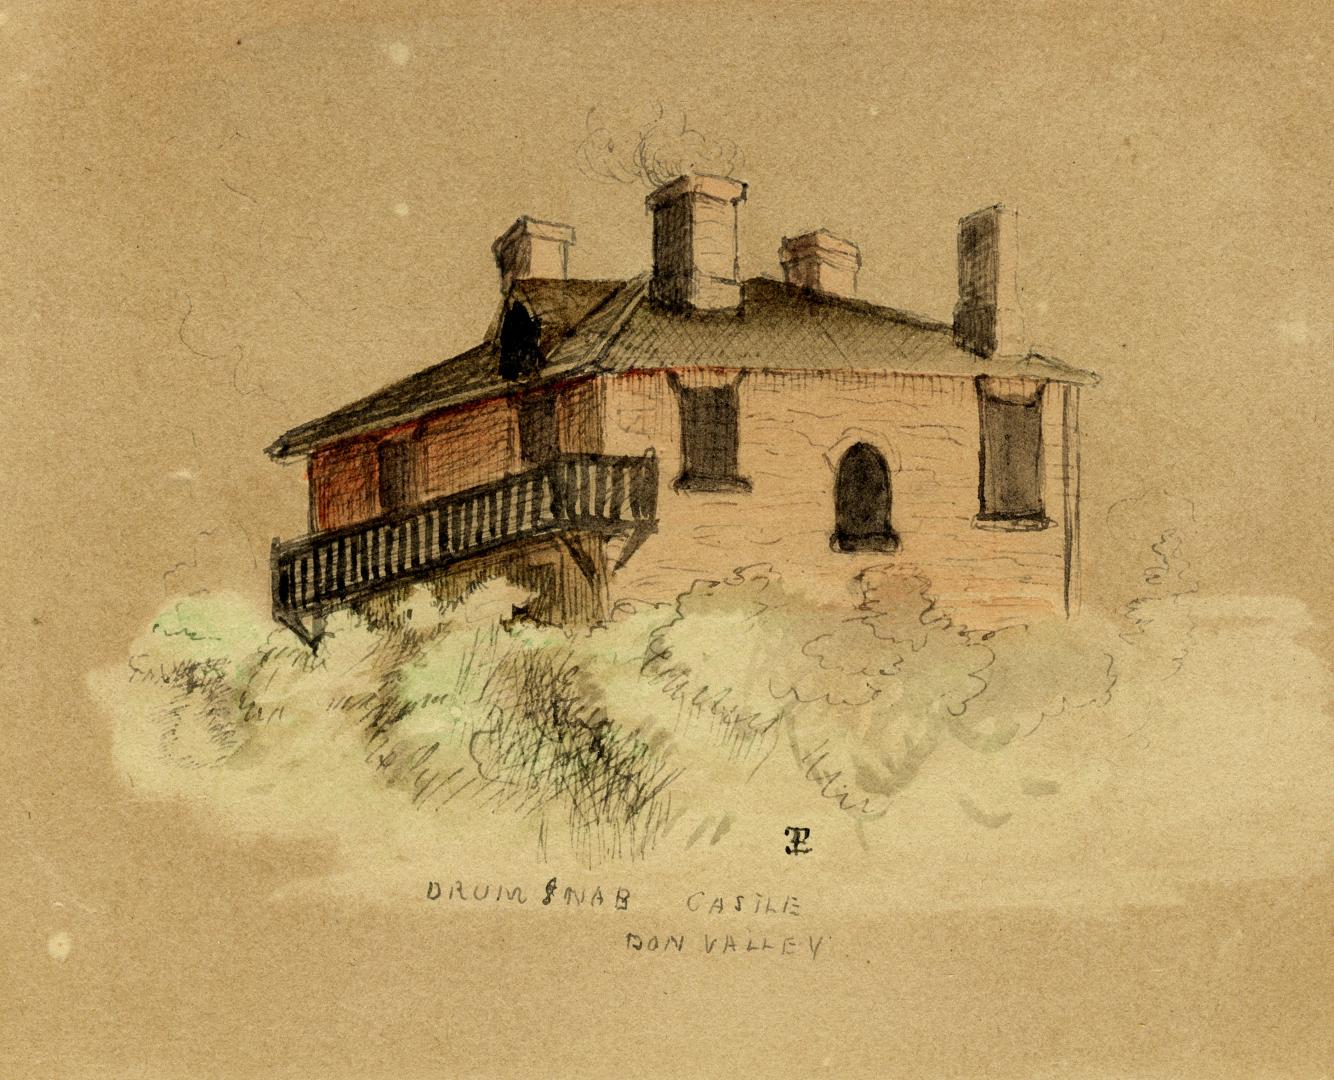 Painting shows a house with a balcony and four chimneys.